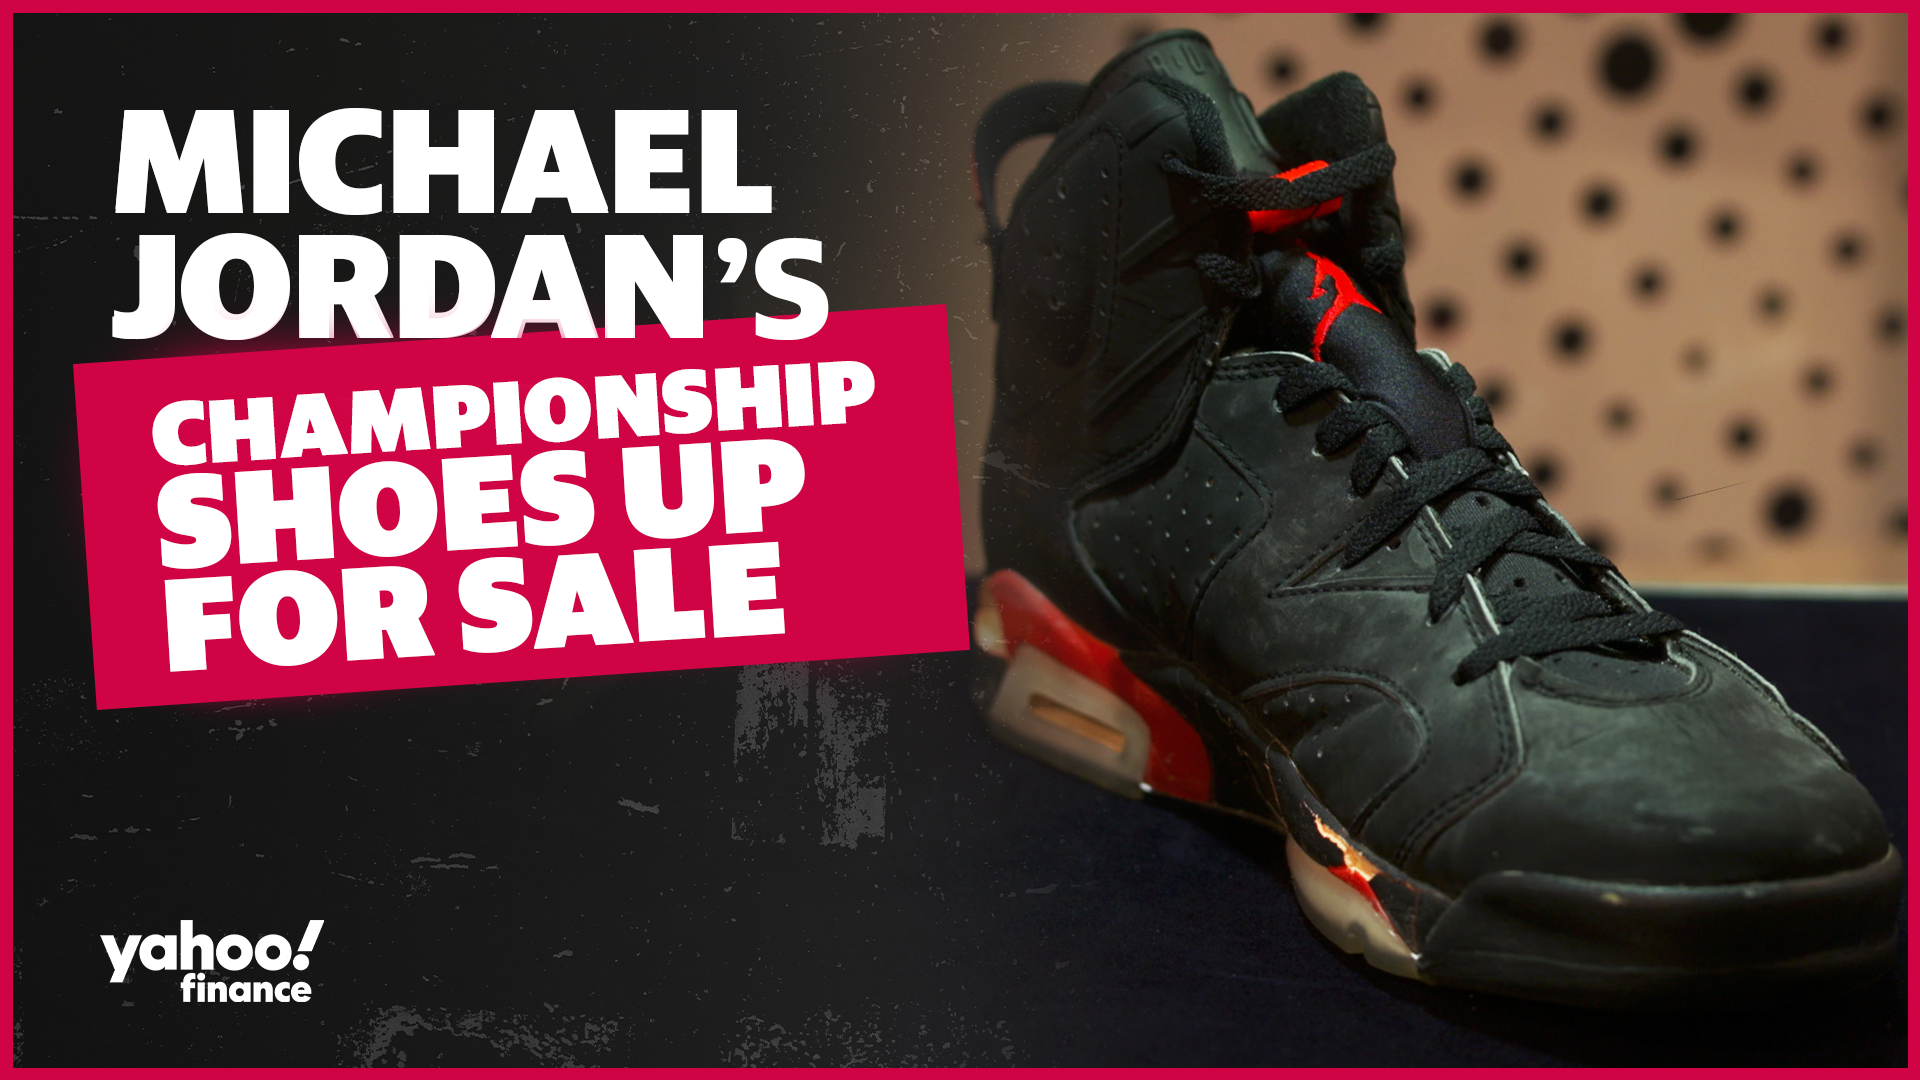 The Dynasty Collection: The Complete Set of Michael Jordan's 'Air Jordan'  Six Championship Sneakers